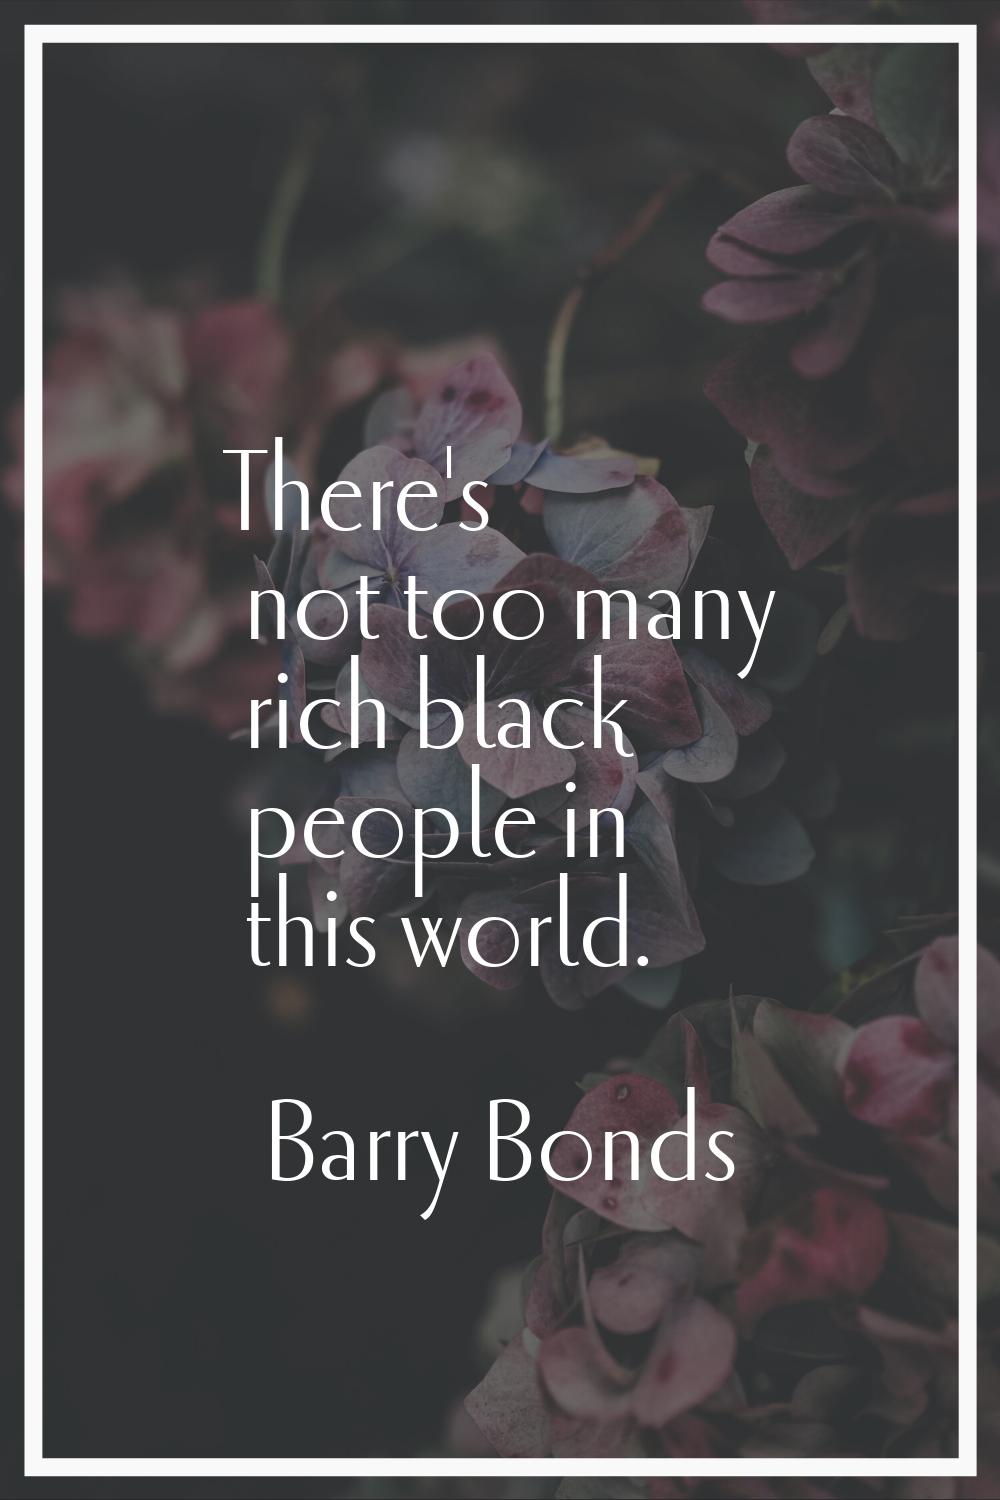 There's not too many rich black people in this world.